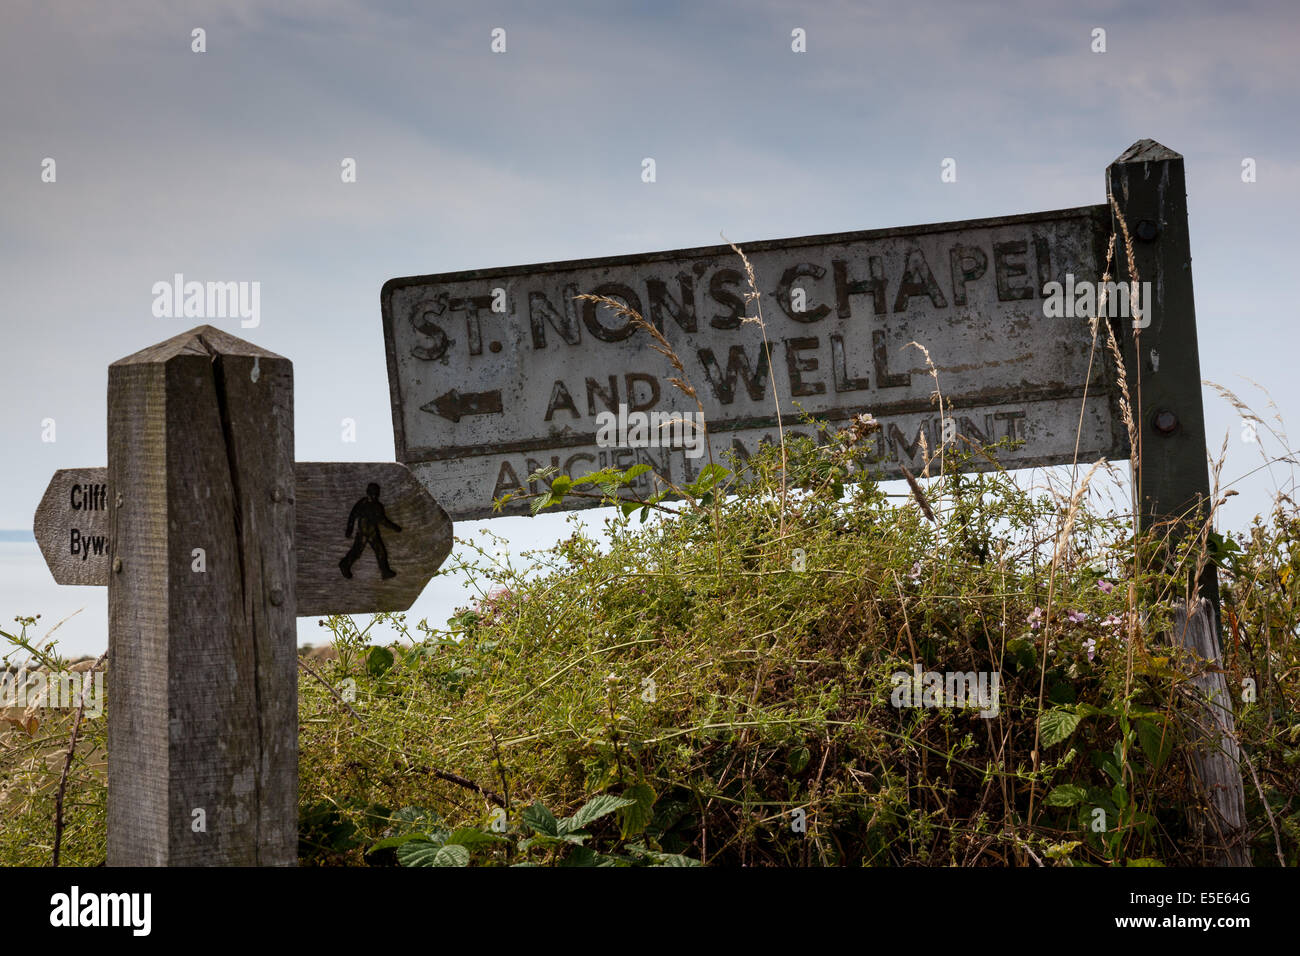 St Non's Chapel and Well Ancient Monument sign near St David's Pembrokeshire, Wales Stock Photo